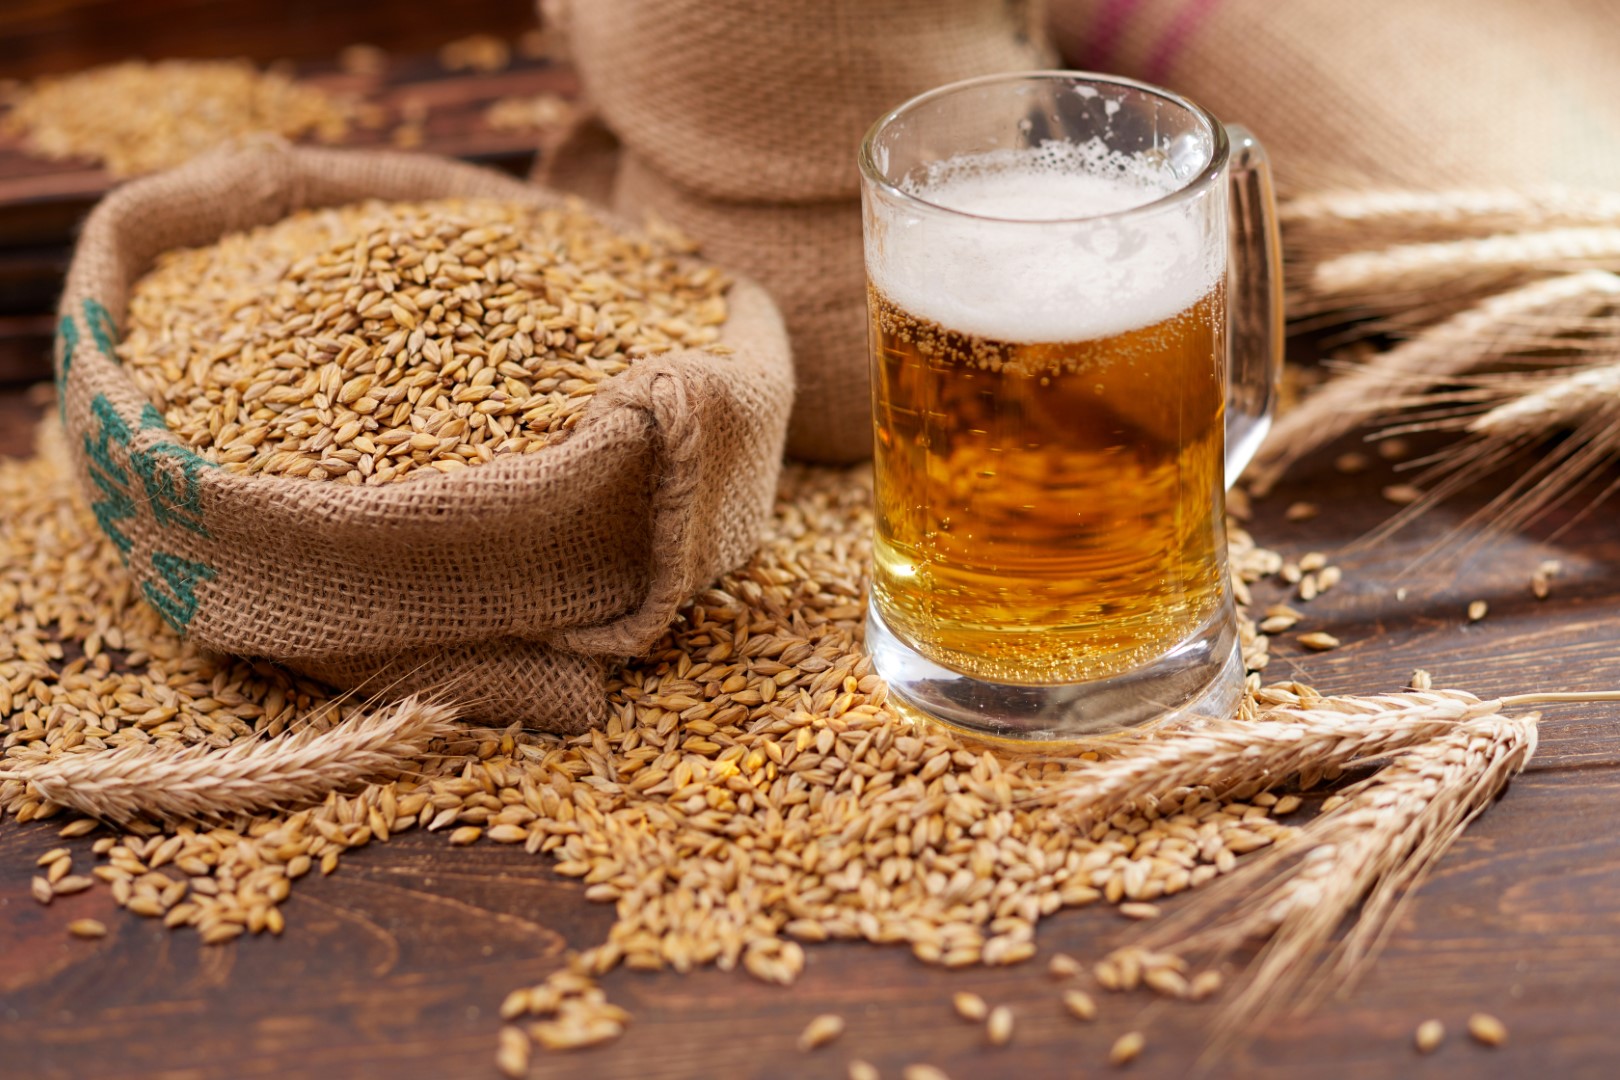 A glass of beer sitting on a wooden table next to an overflowing bag of grains.